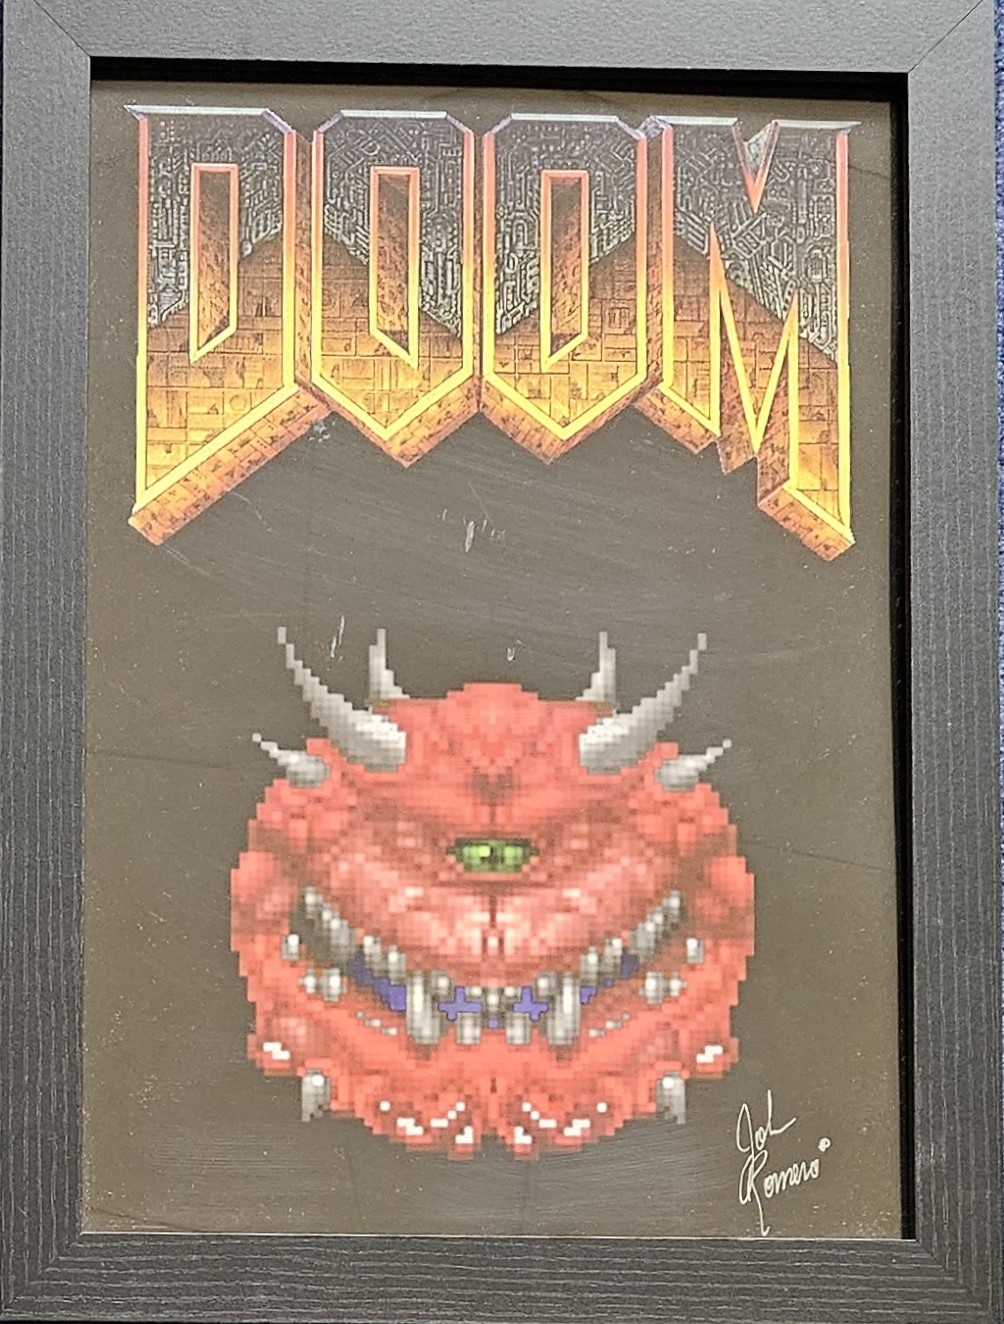 John Romero signed Doom illustrated piece. Framed to approx. size 18x14inch. Good condition. All